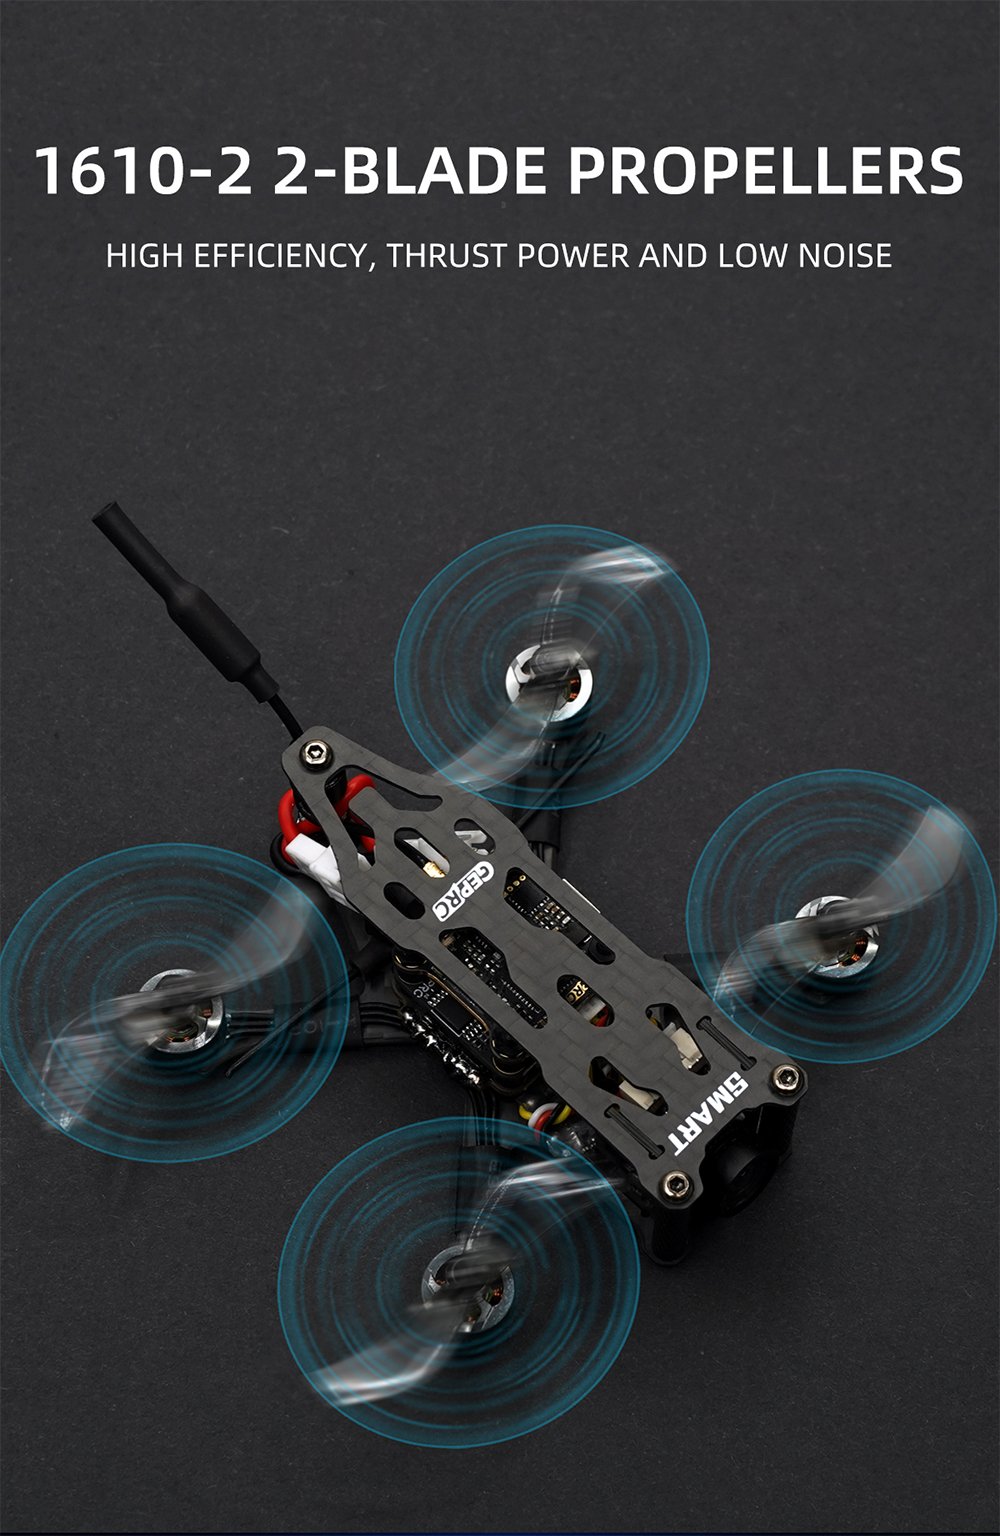 GEPRC-SMART16-78mm-2S-Freestyle-Analog-FPV-Racing-Drone-BNF-Caddx-Ant-Camera-F411-FC-12A-BLheli_S-4I-1916825-7